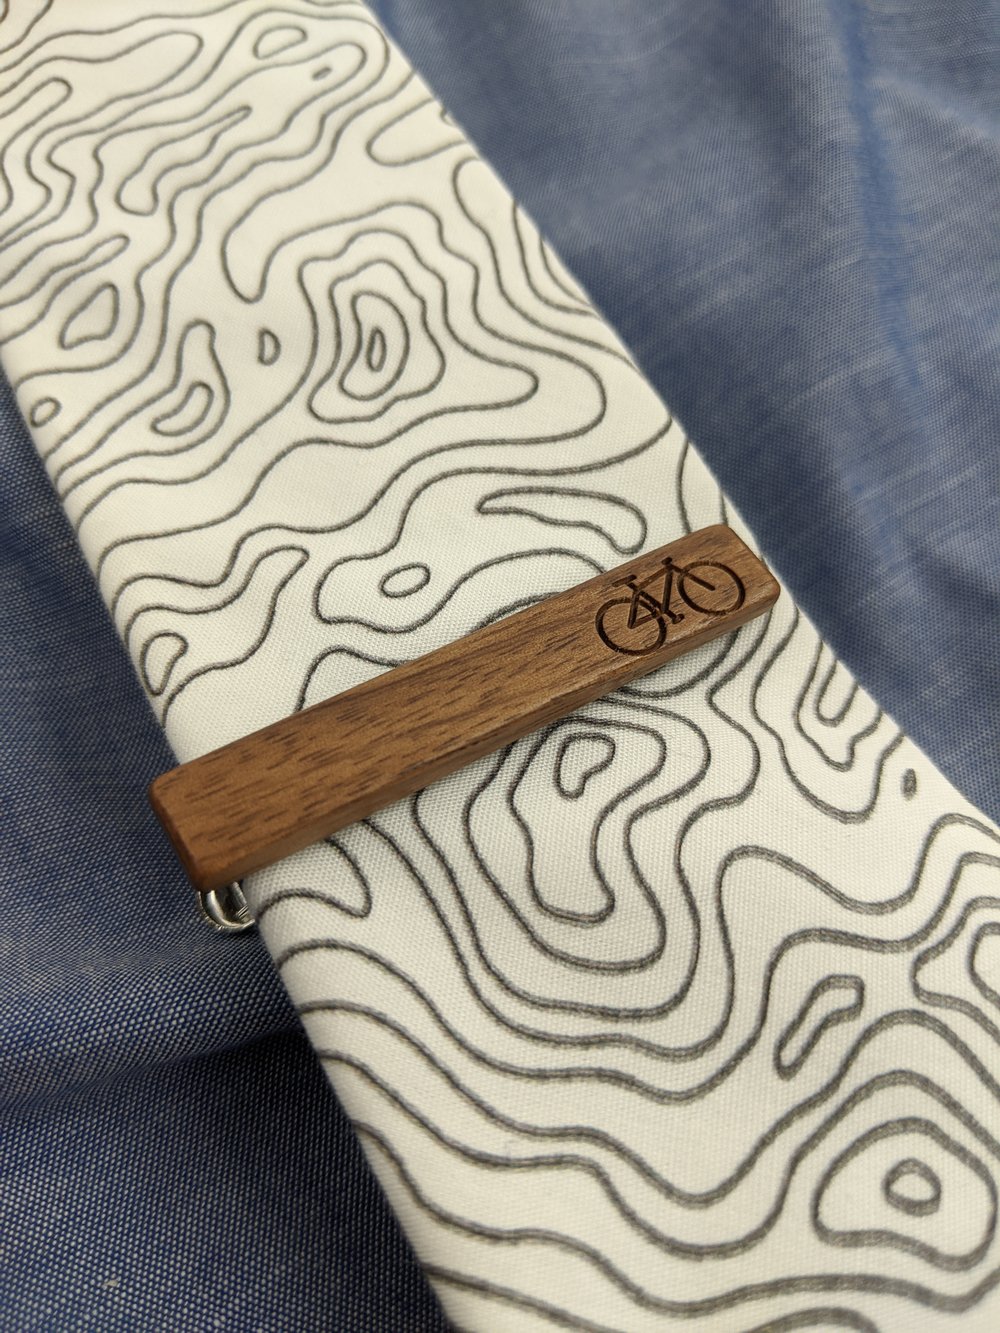 The Silent Pine's Hand Made Wood tie clips